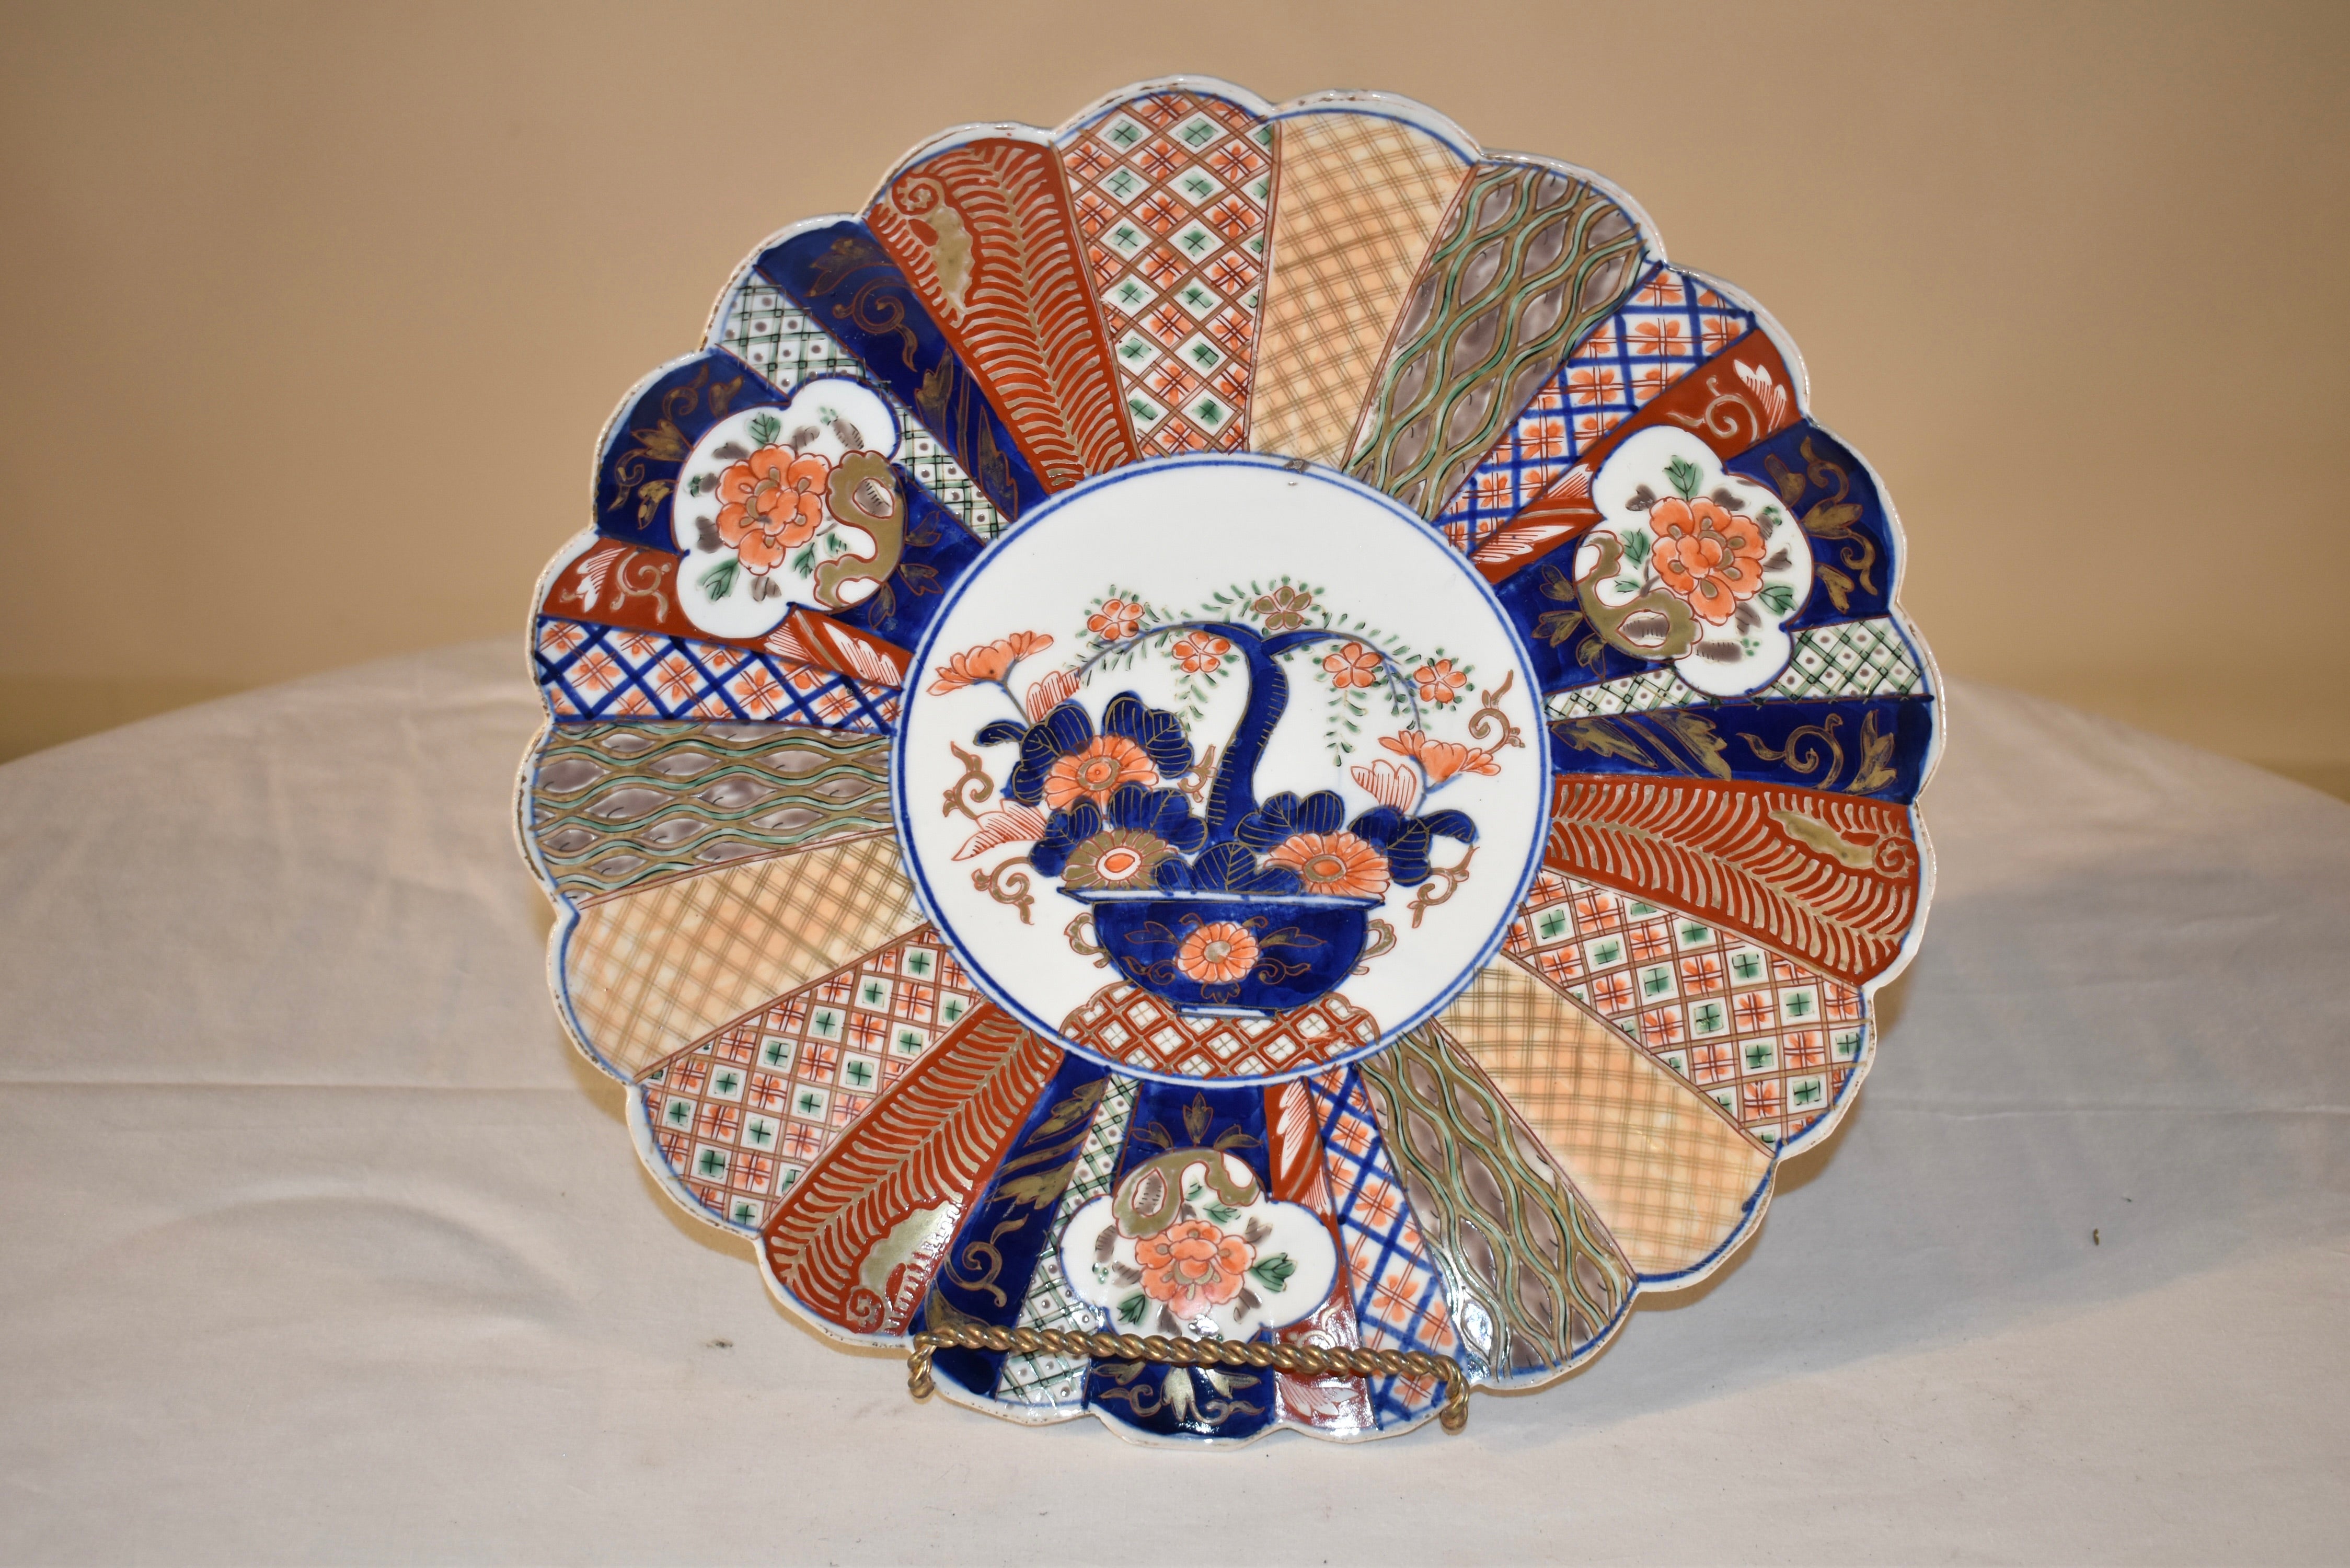 19th century Imari charger with exquisitely hand painted patterns in lovely colors. There is a central medallion, which depicts what appears to be a jade tree, surrounded by florals. The central medallion is surrounded by a fan pattern of different